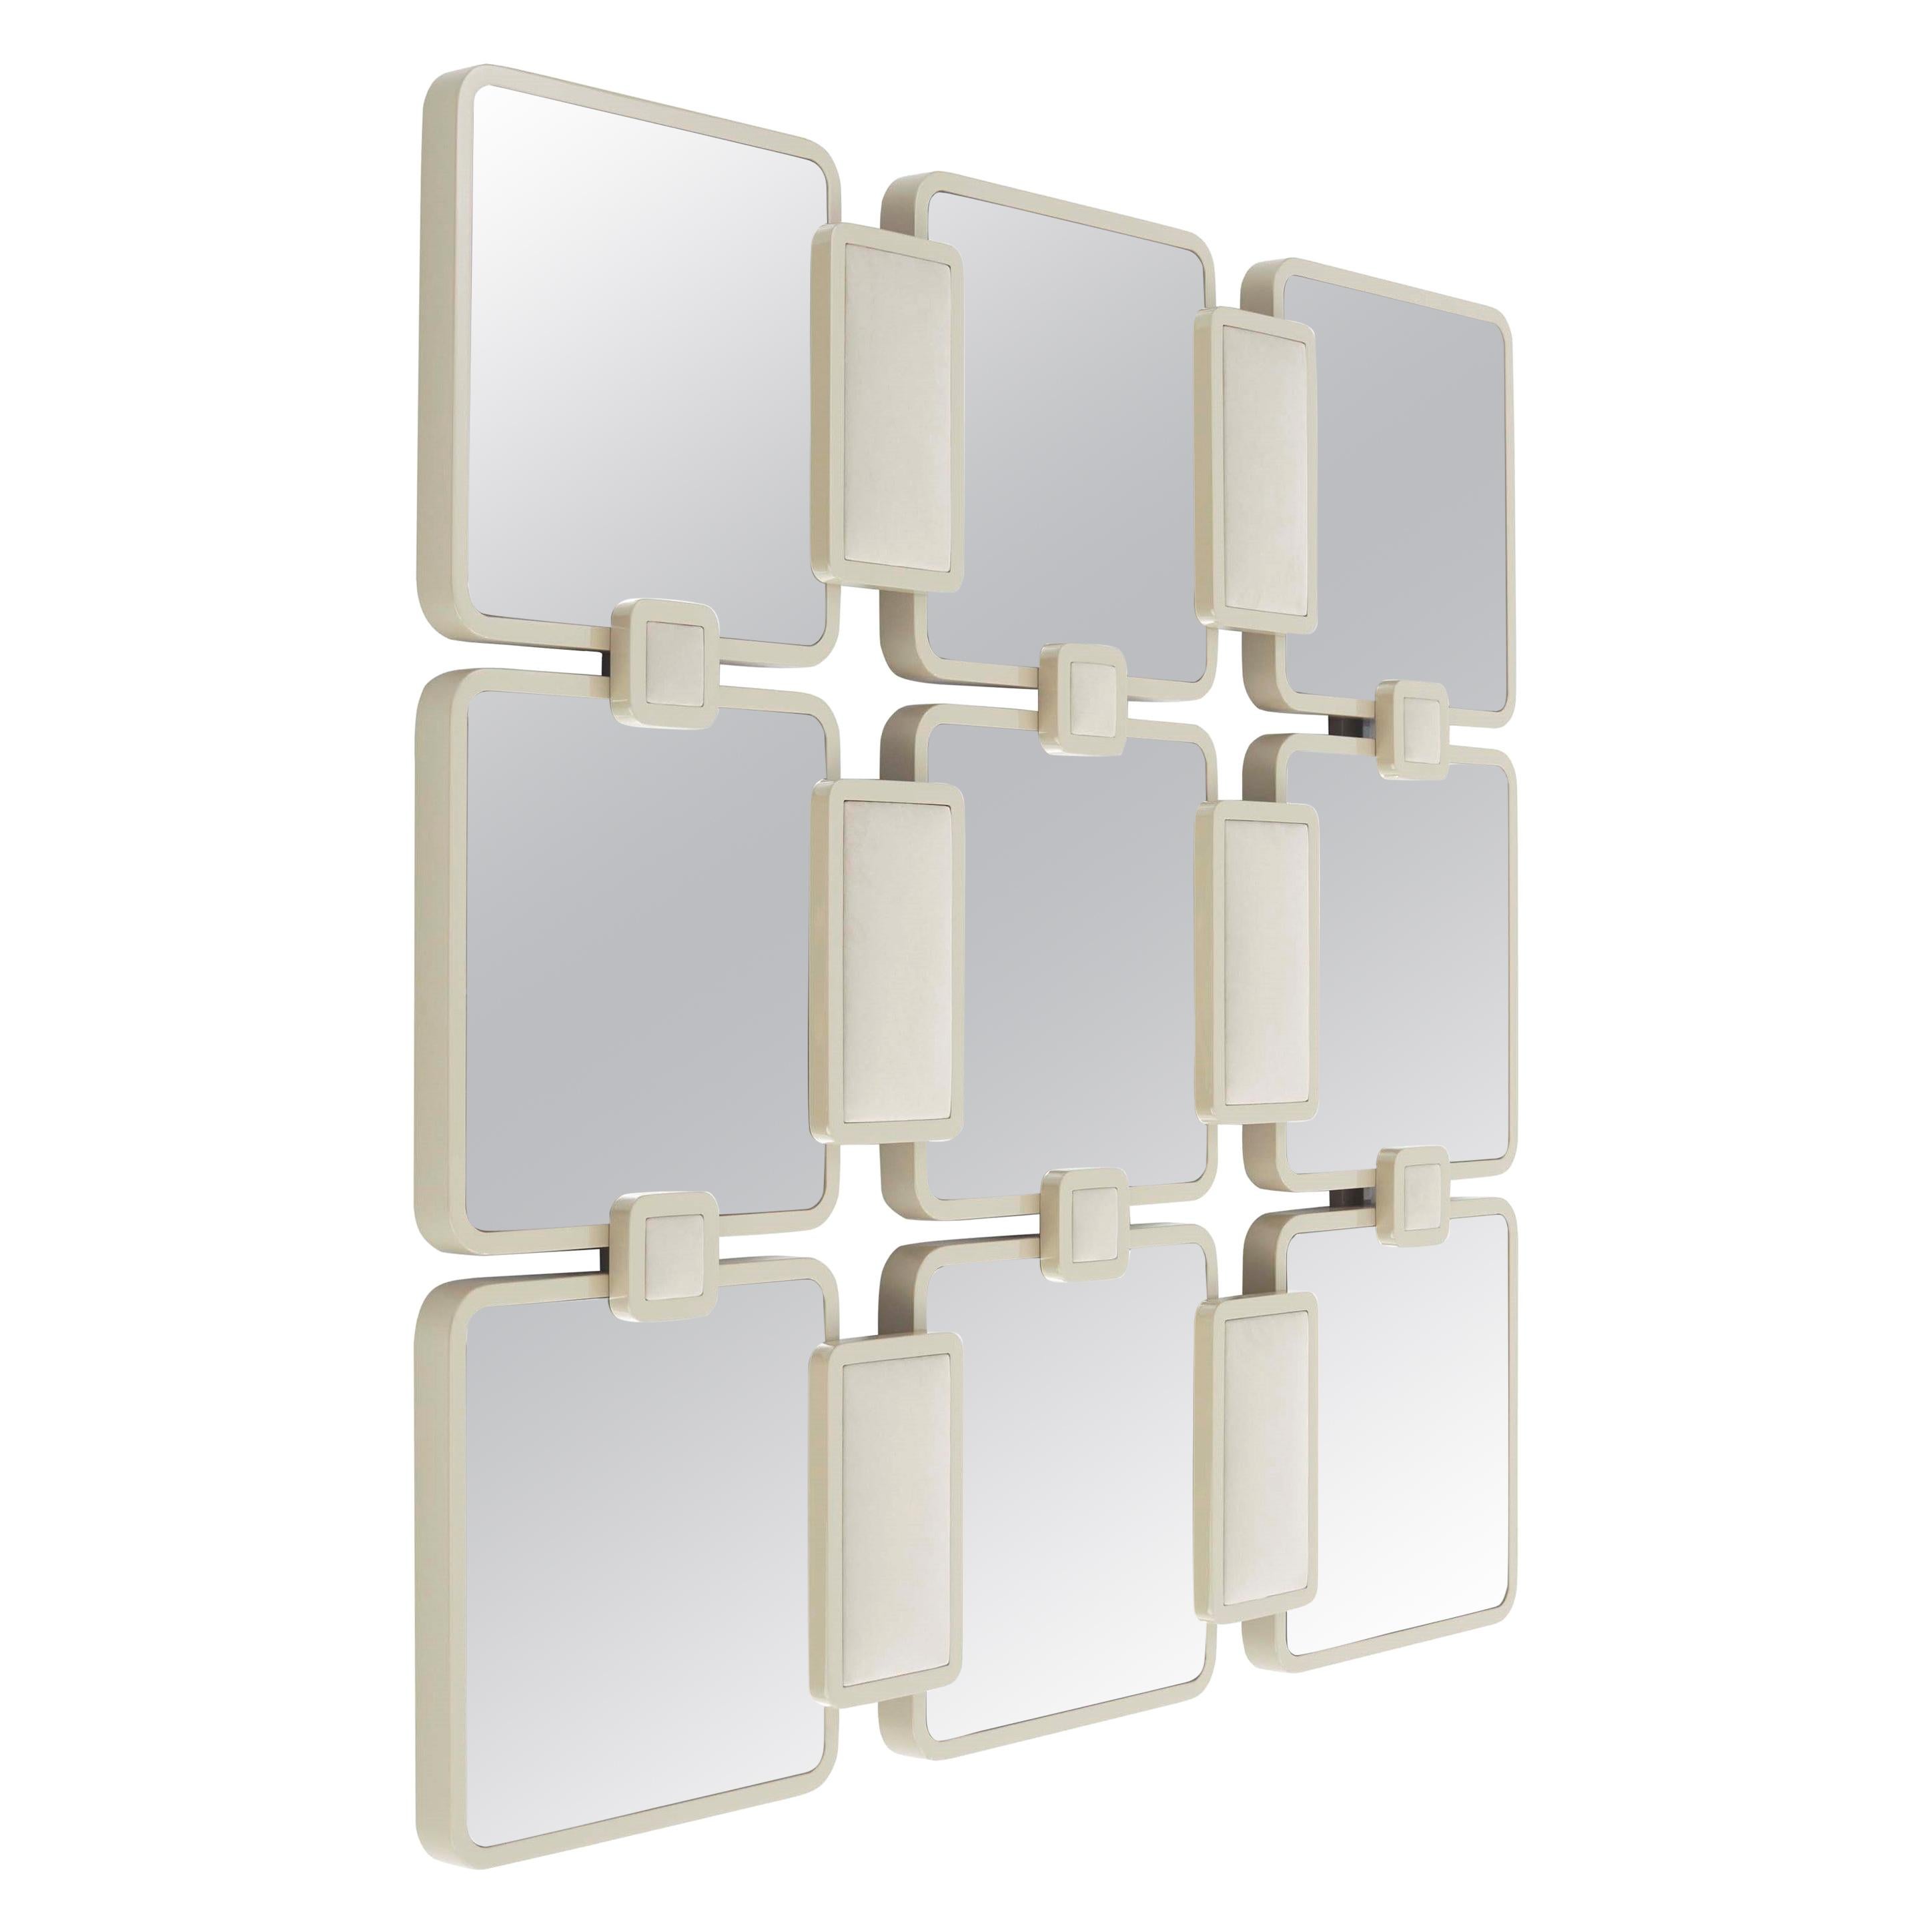 IMPETO II mirror with lacquered frame and Upholstered Panels For Sale